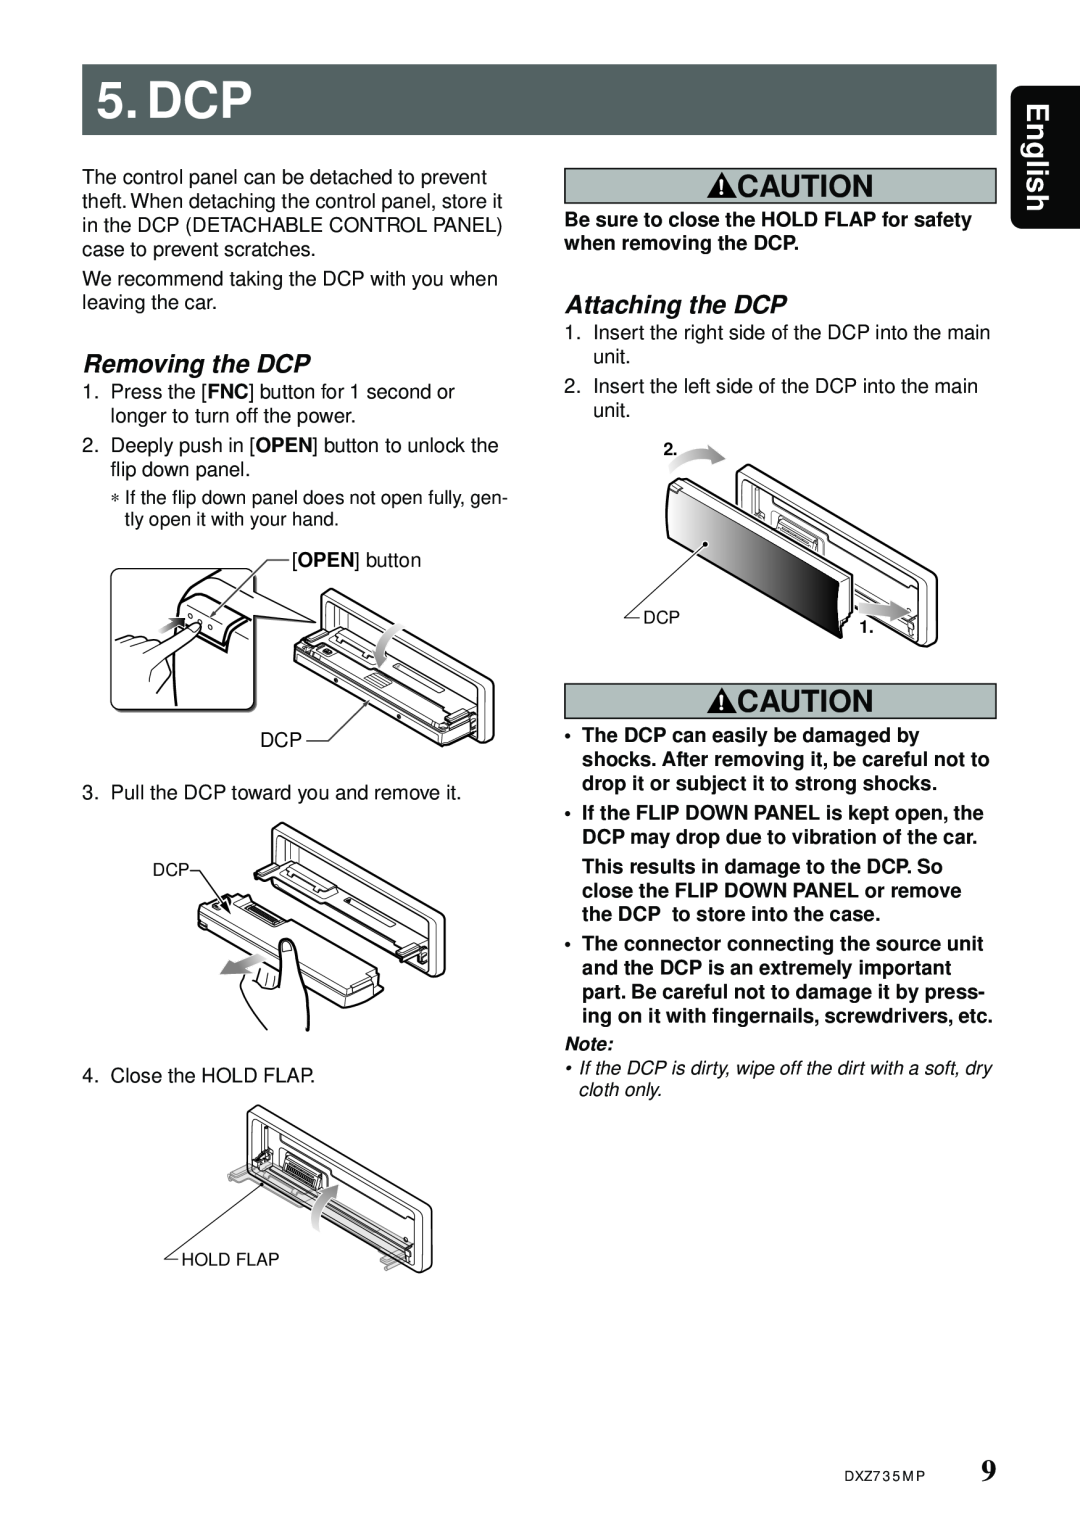 Clarion DXZ735MP owner manual Dcp, Removing the DCP, Attaching the DCP, English, Be sure to close the HOLD FLAP for safety 